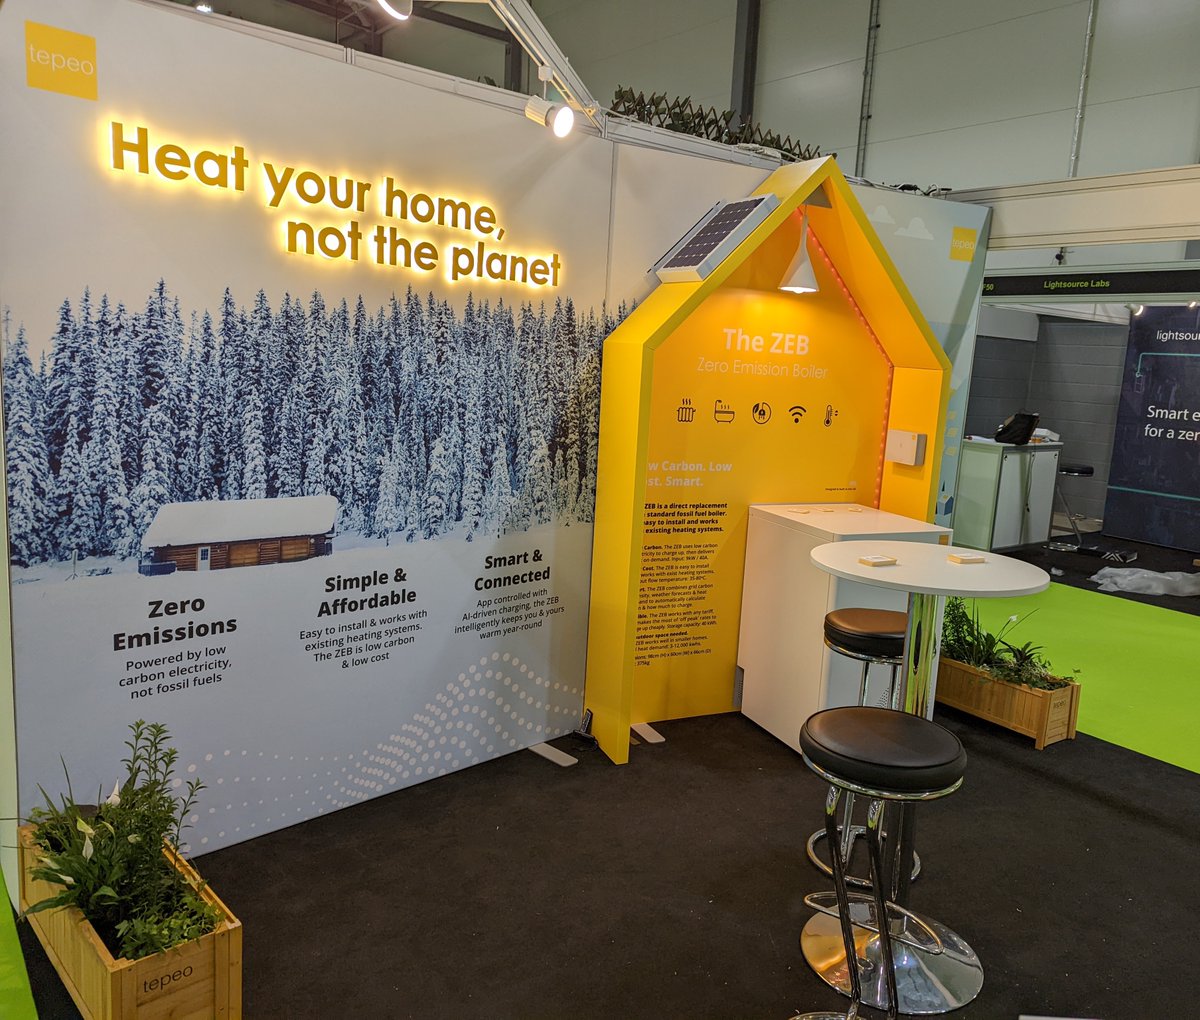 We're in! Come and visit us on stand F42 from tomorrow to Sunday at #FullyChargedLIVE

Not too late to get a ticket too ⬇
bit.ly/3vmKUuA

#electrification #zeroemissionboiler #cleanenergy #stopburningstuff

@FullyChargedShw @BobbyLlew @FullyChargedDan